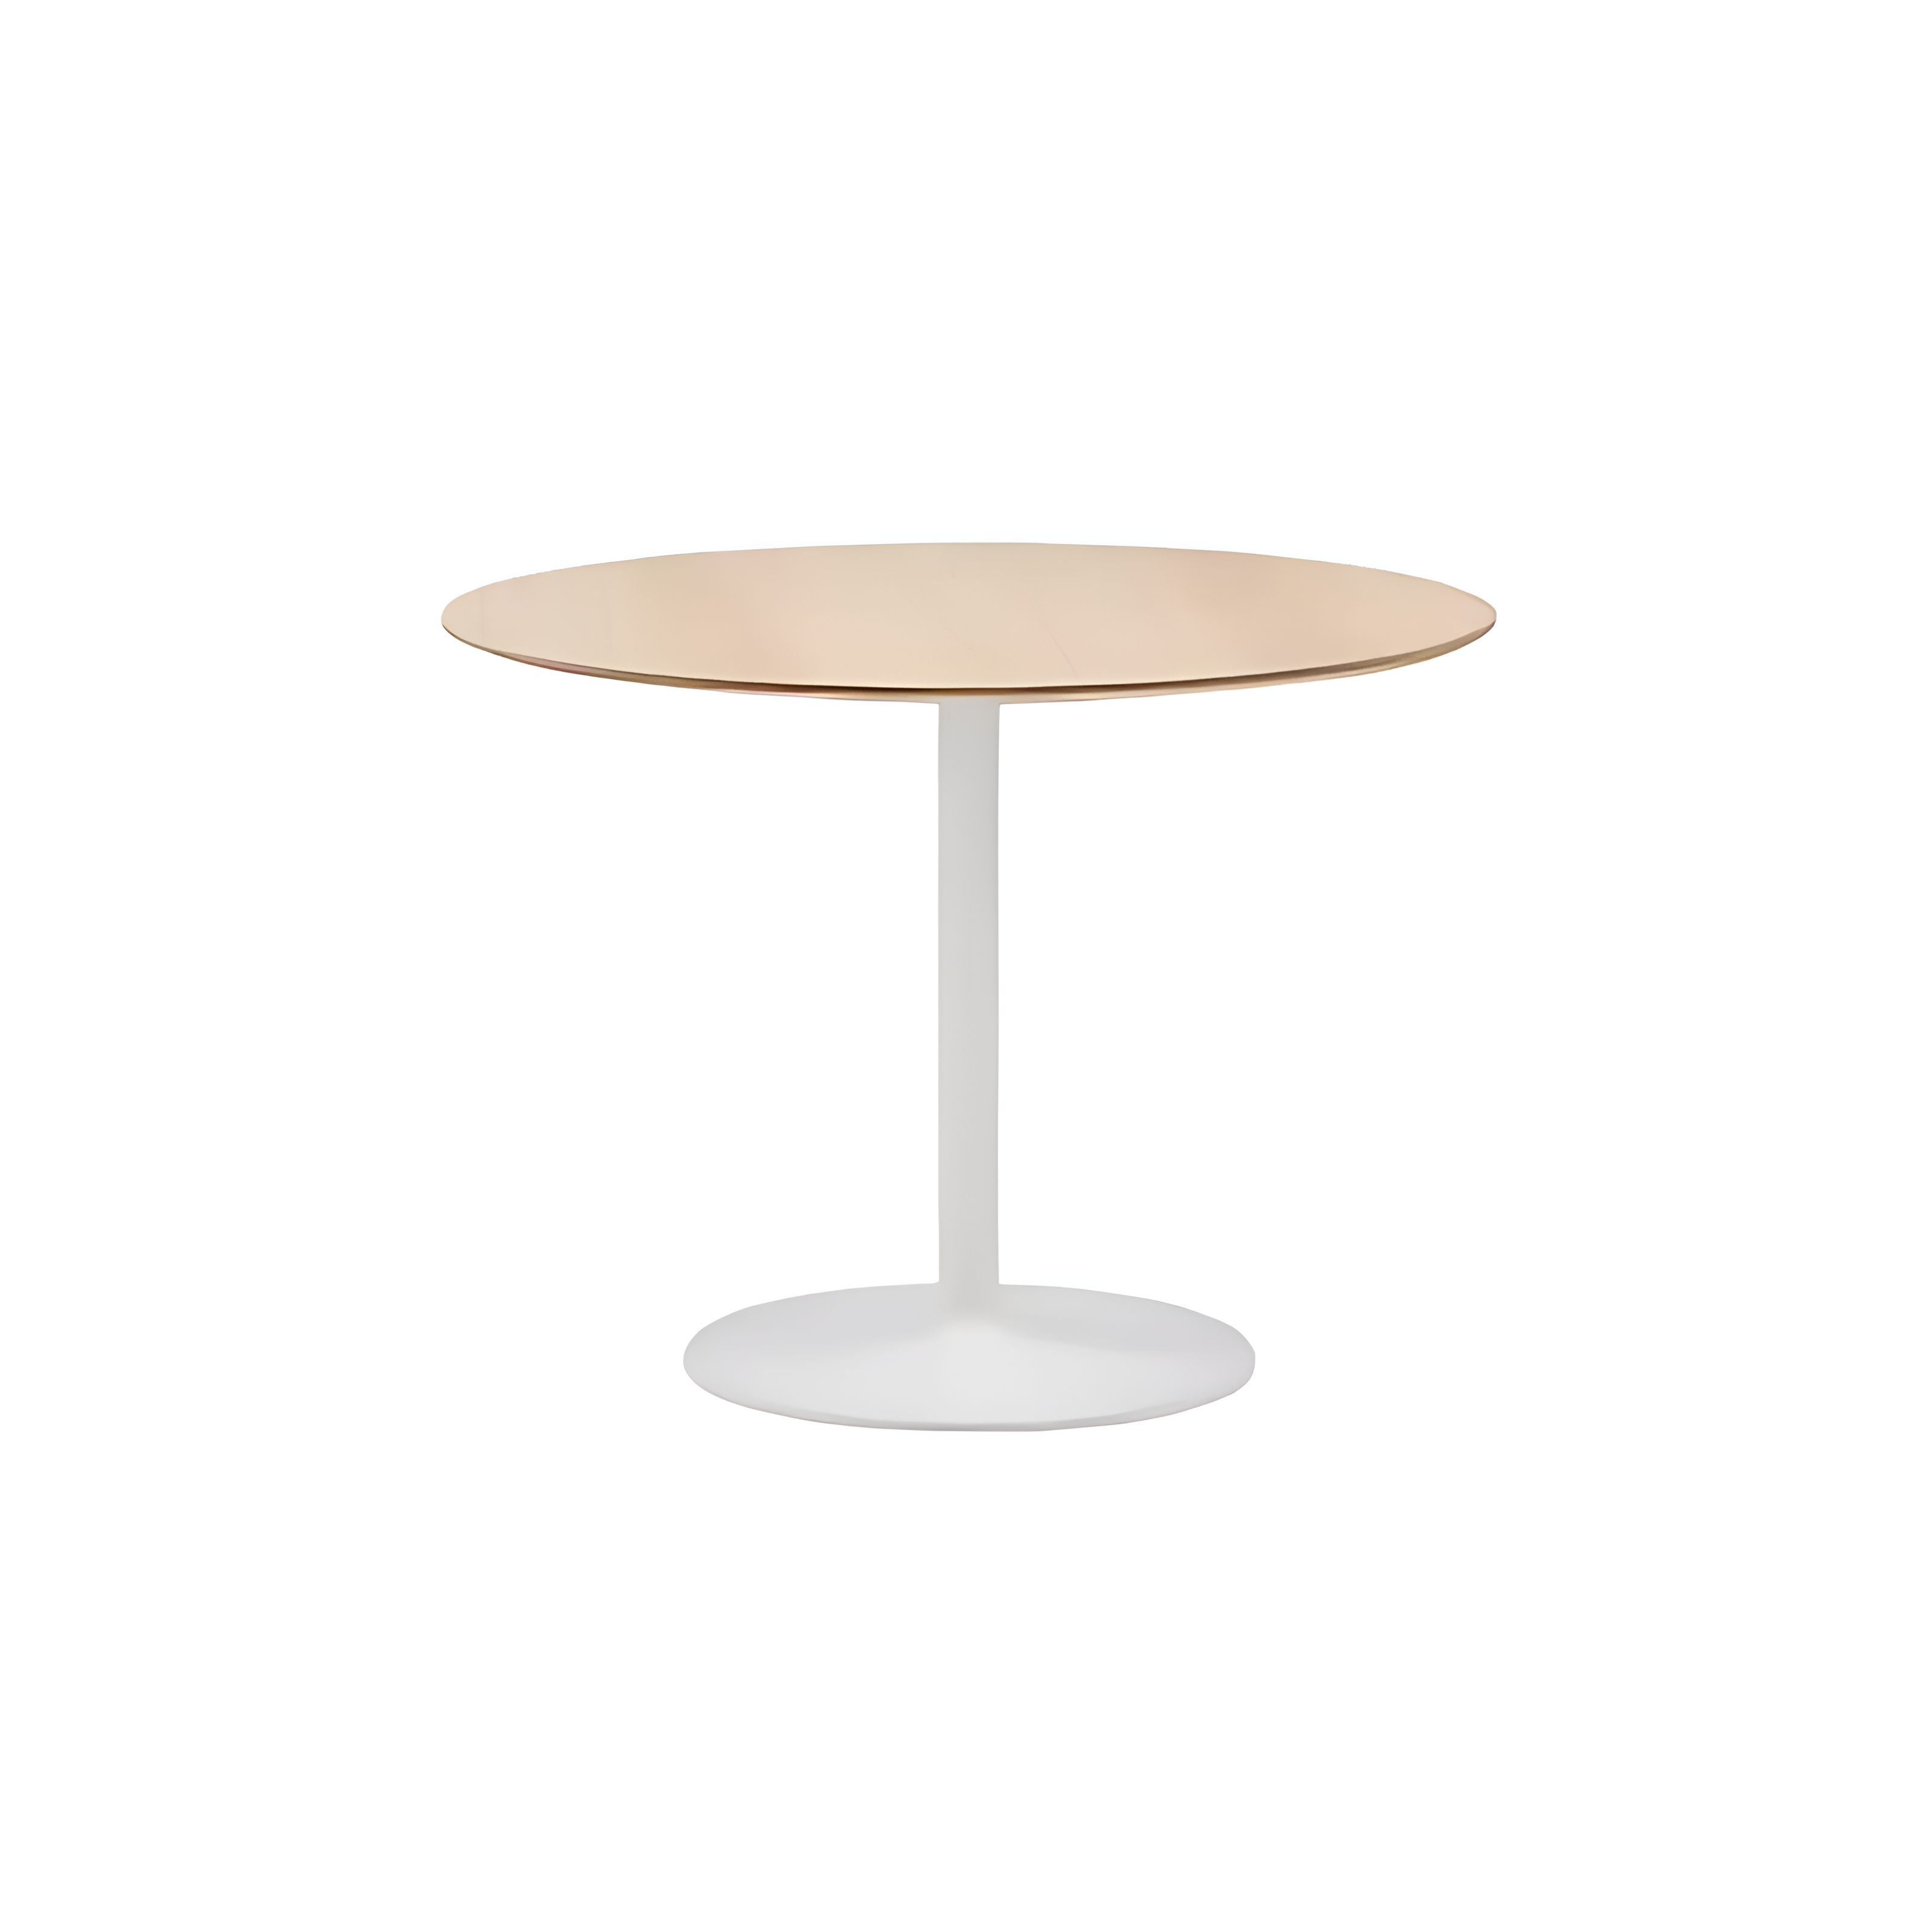 DUAL DINING TABLE BASE